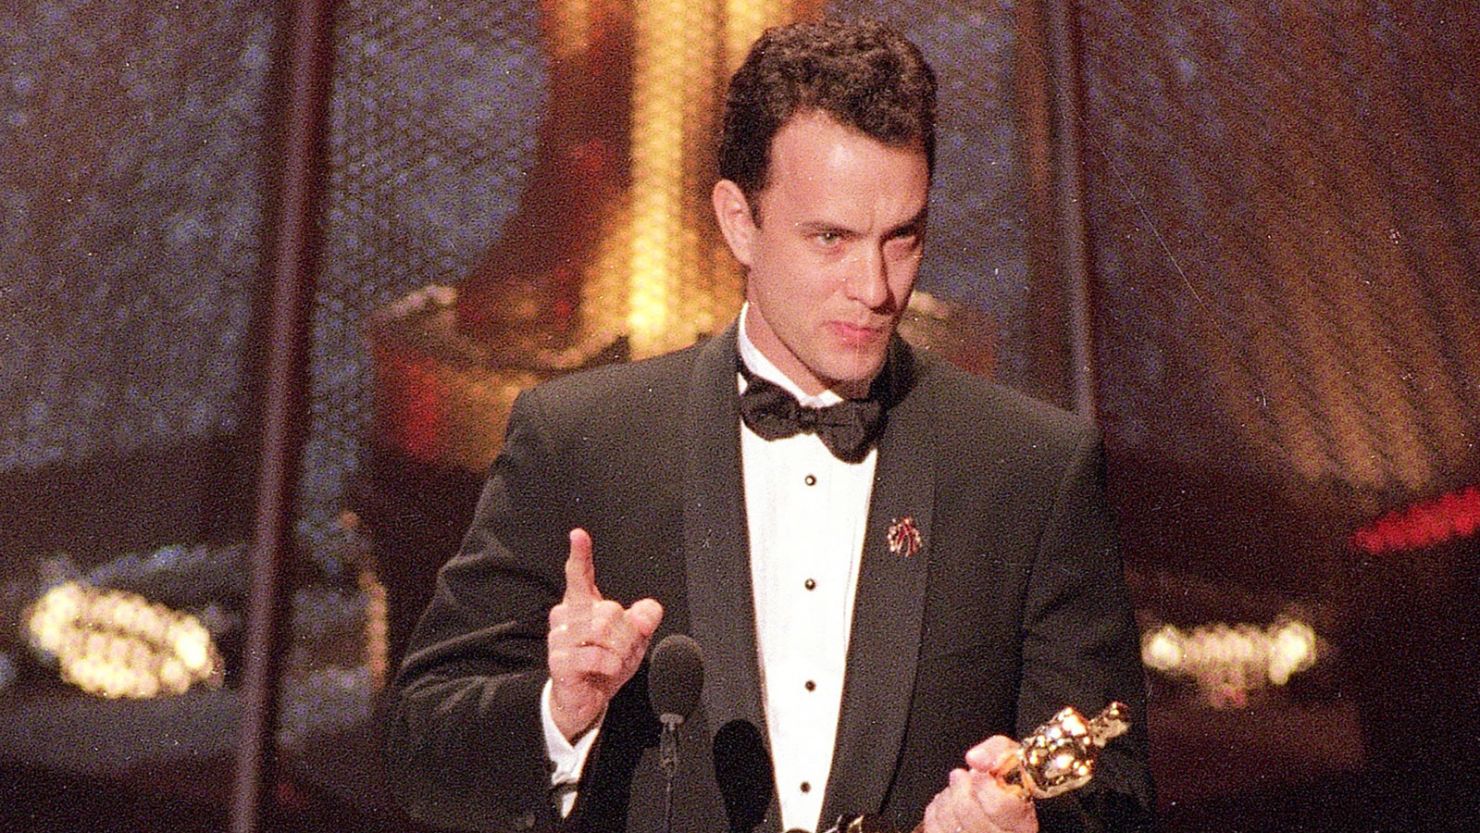 Revisit the Tom Hanks Oscars acceptance speech that Spielberg called